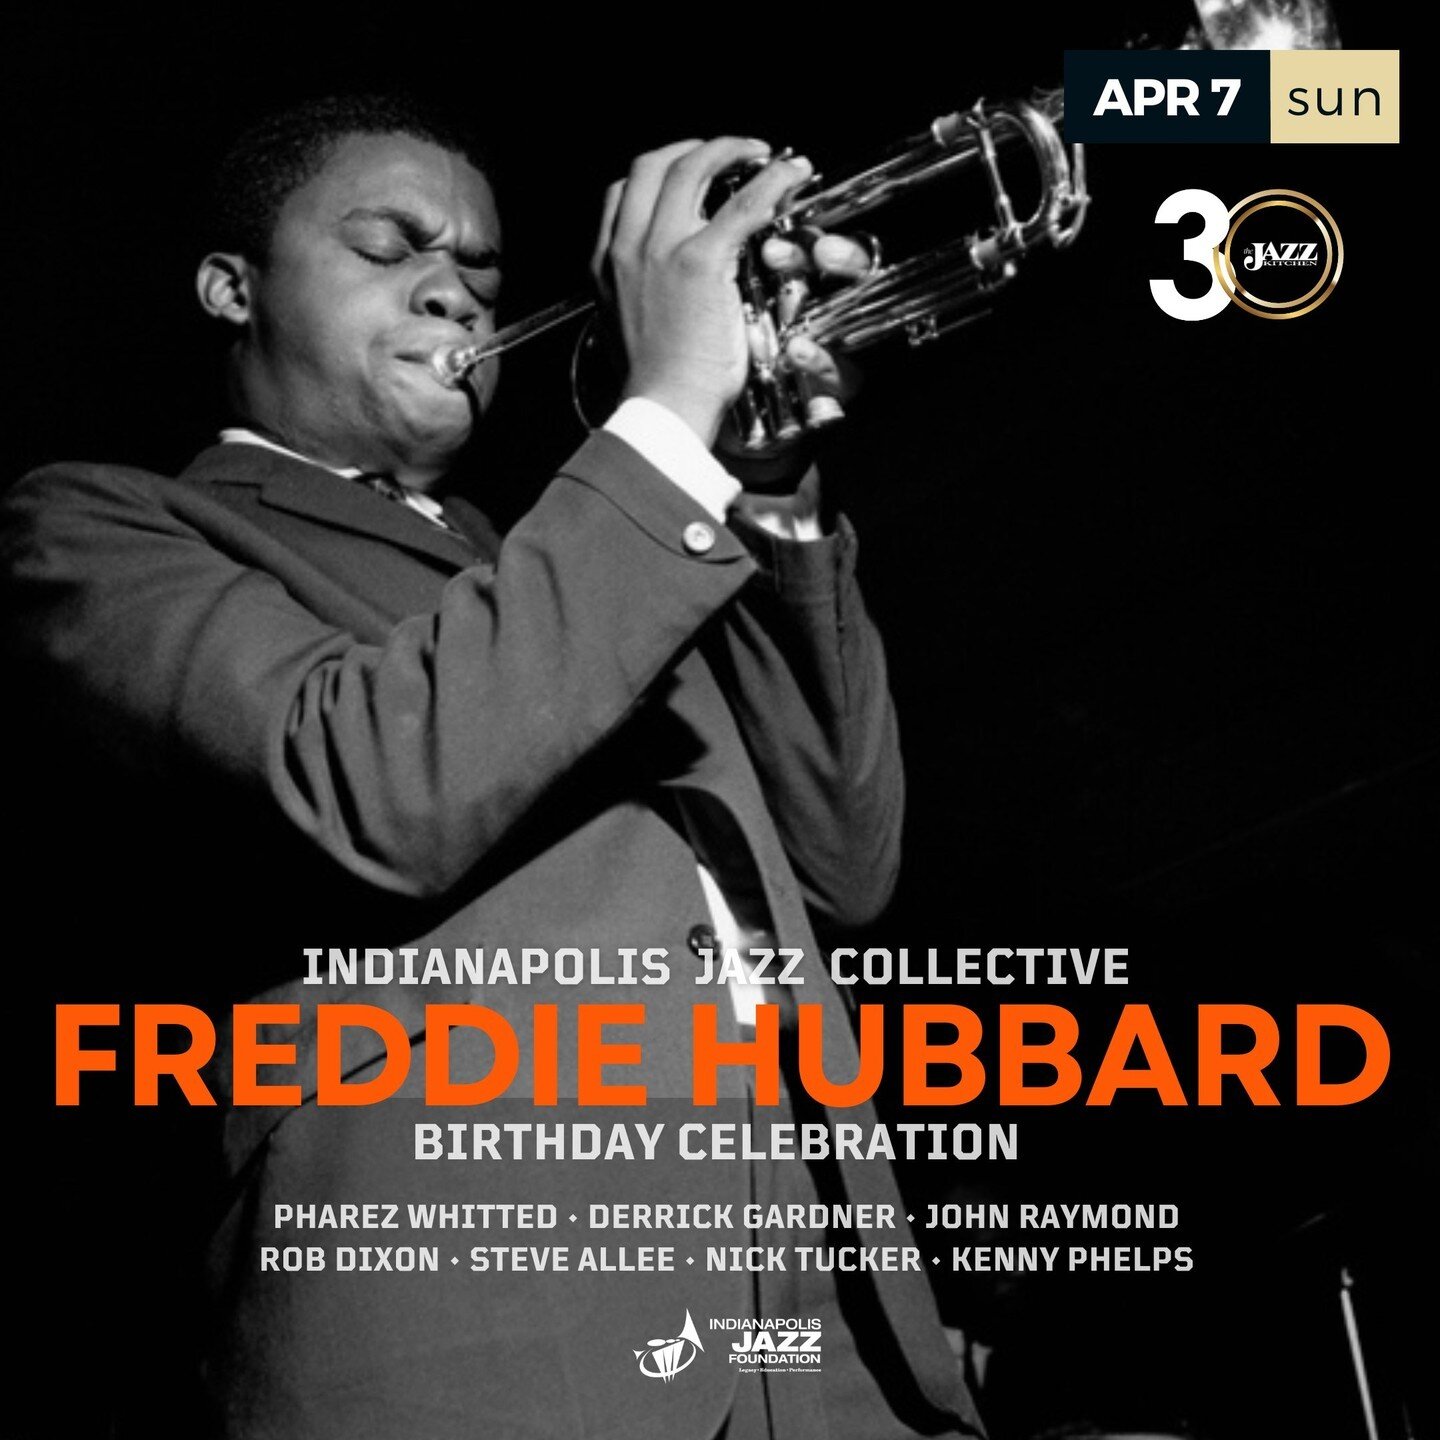 Freddie Hubbard Birthday Tribute this Sunday featuring Pharez Whitted, Derrick Gardner, John Raymond and the Indianapolis Jazz Collective! - https://mailchi.mp/indyjazzfest/february-2024-newsletter-412129